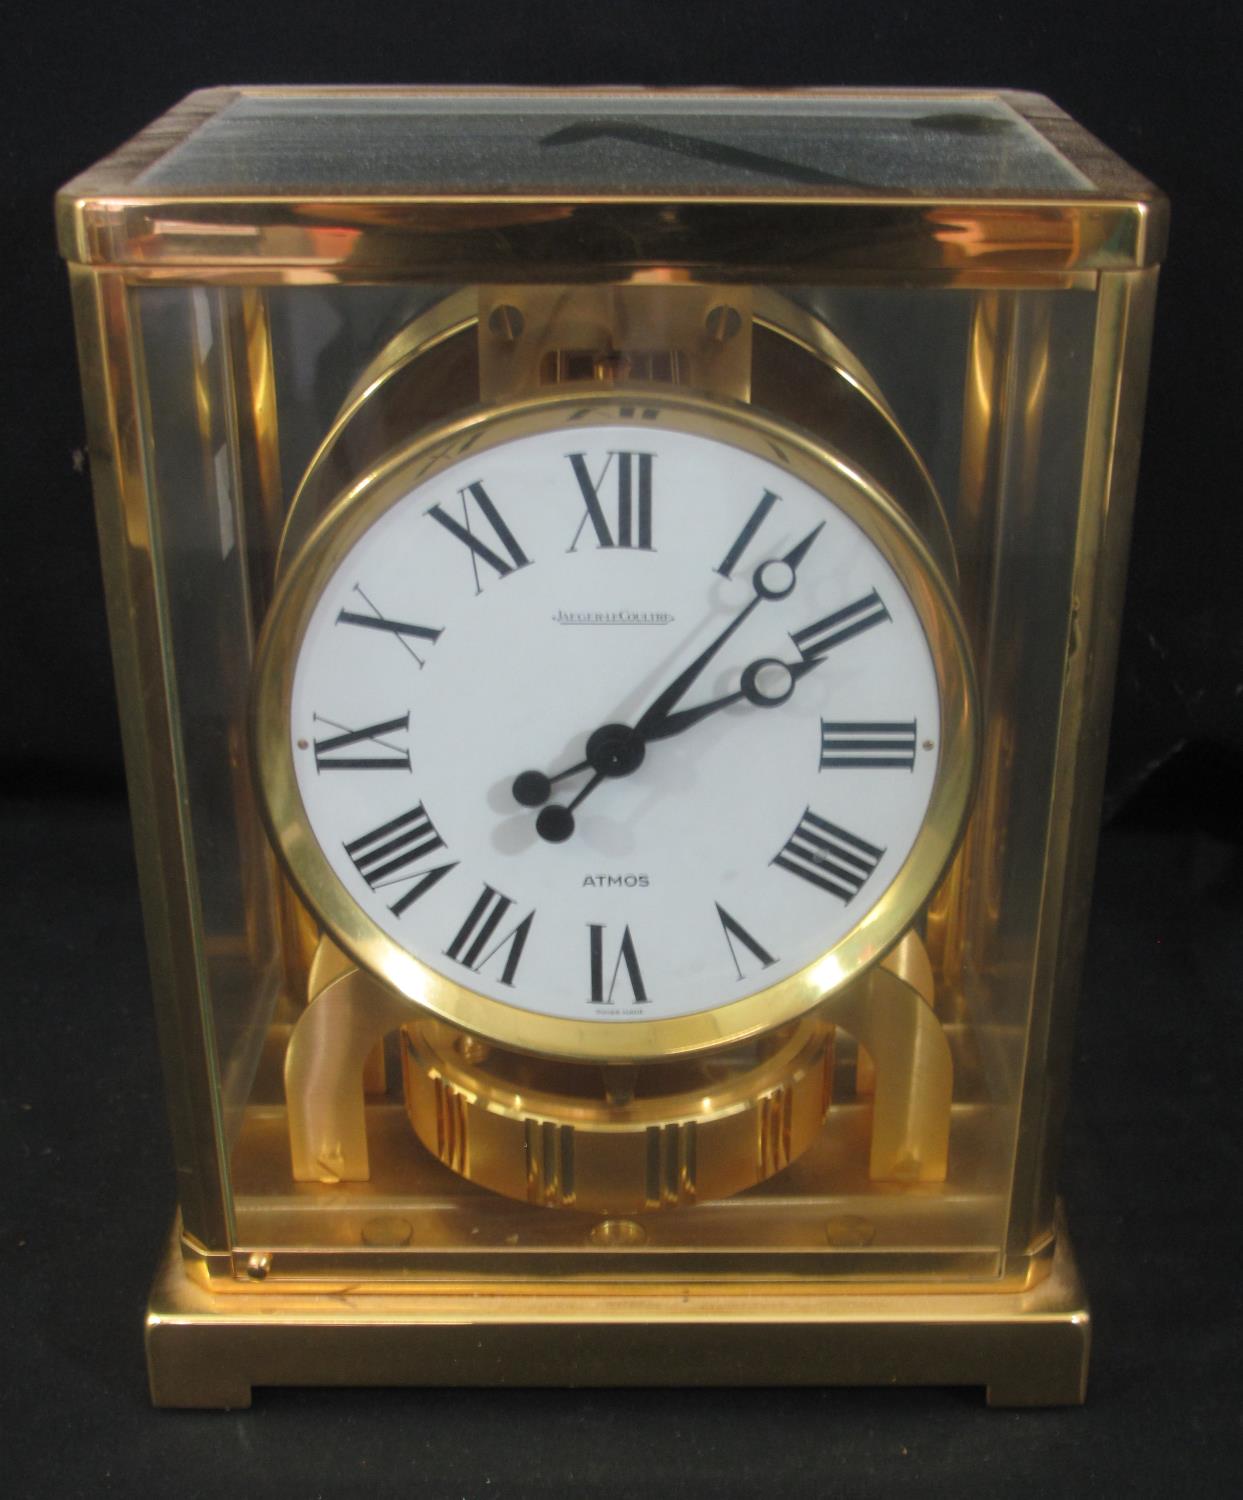 JAEGER LE COULTRE ATMOS CLOCK, Swiss made on a brass frame and base with glass panels, serial no. to